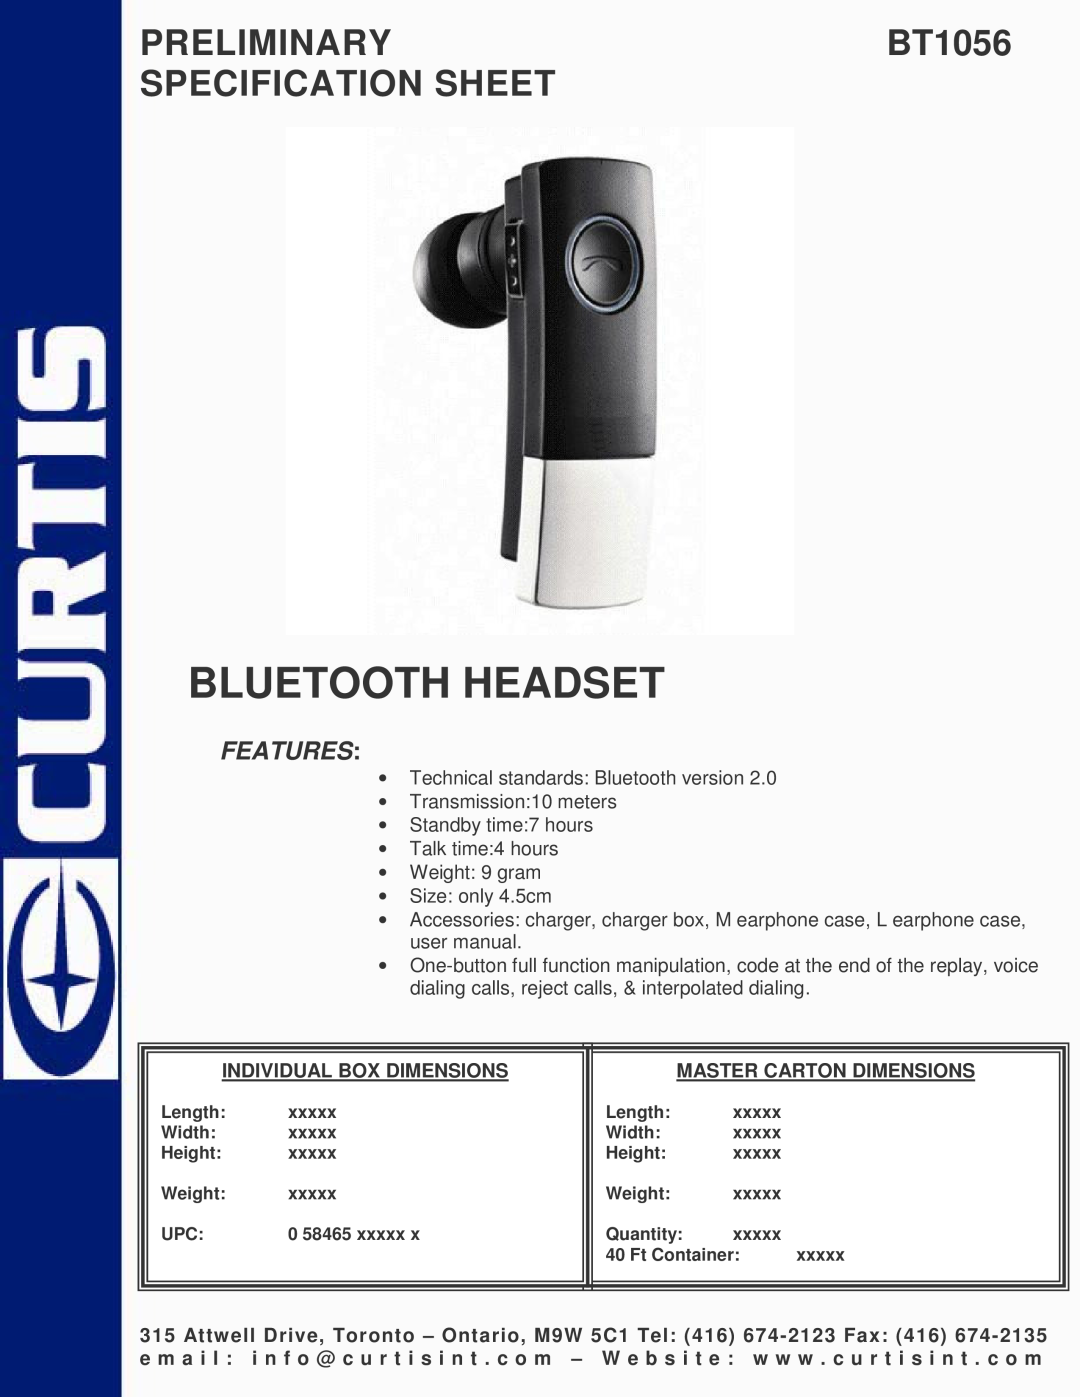 Curtis specifications Bluetooth Headset, PRELIMINARYBT1056 SPECIFICATION SHEET, Features, Individual Box Dimensions 